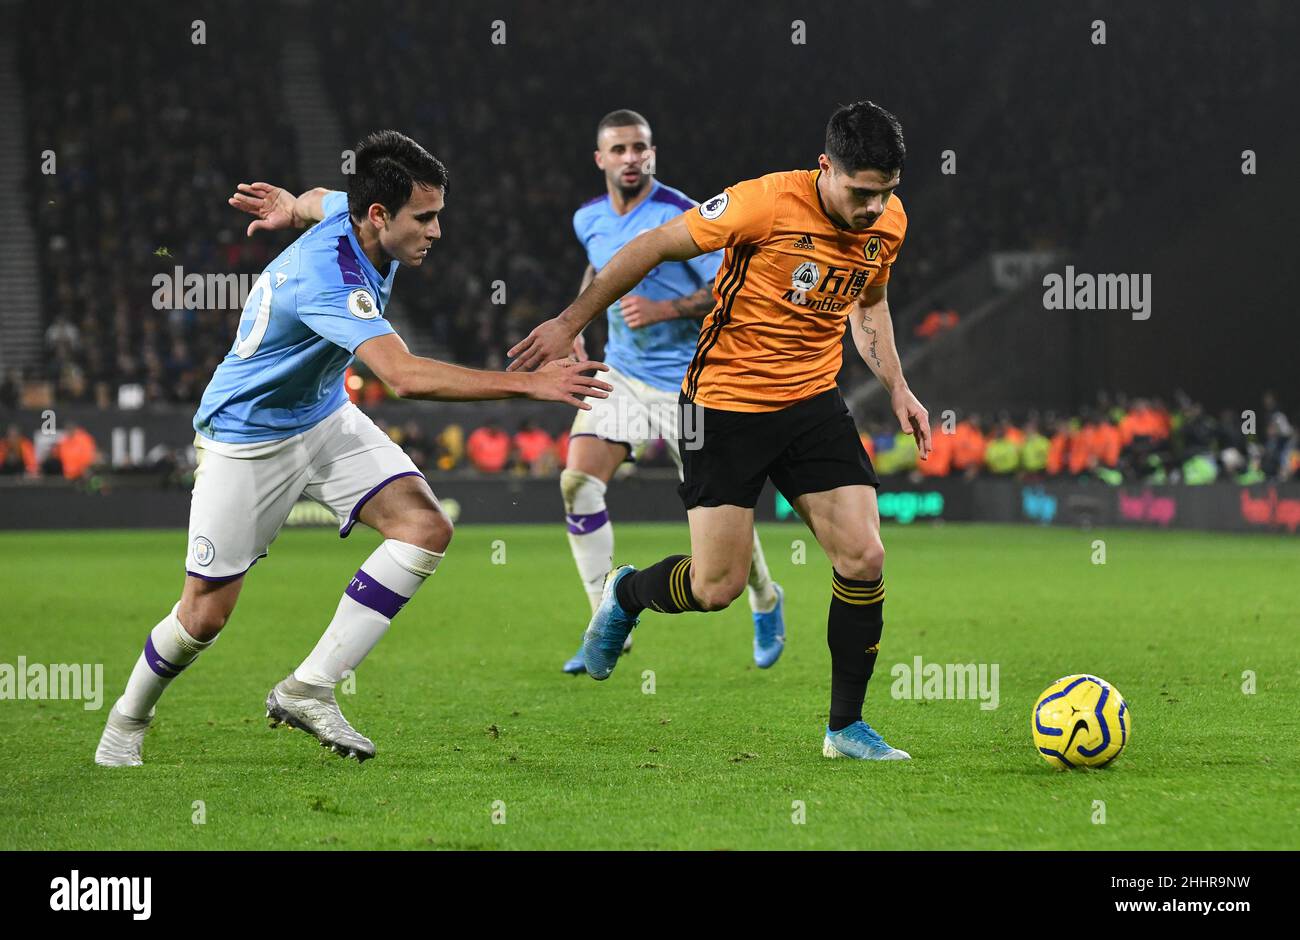 Wolves footballer Pedro Neto and Eric Garcia of City in action Wolverhampton Wanderers v Manchester City at Molineux Stadium 27/12/2019 Stock Photo